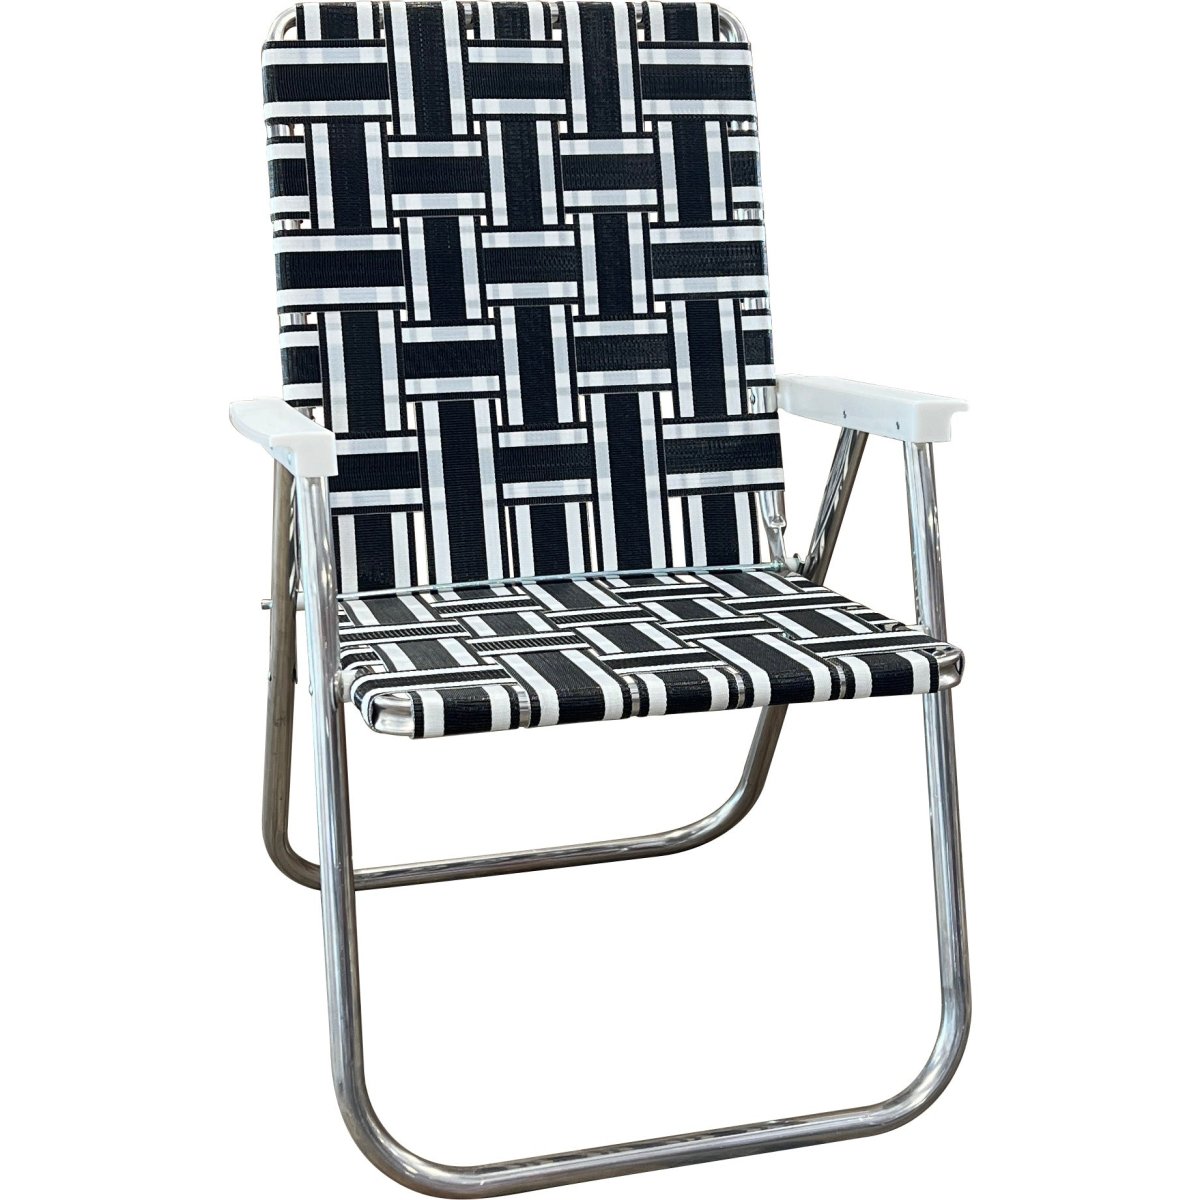 Lawn Chair USA Black and White Stripe Classic Lawn Chair - lily & onyx